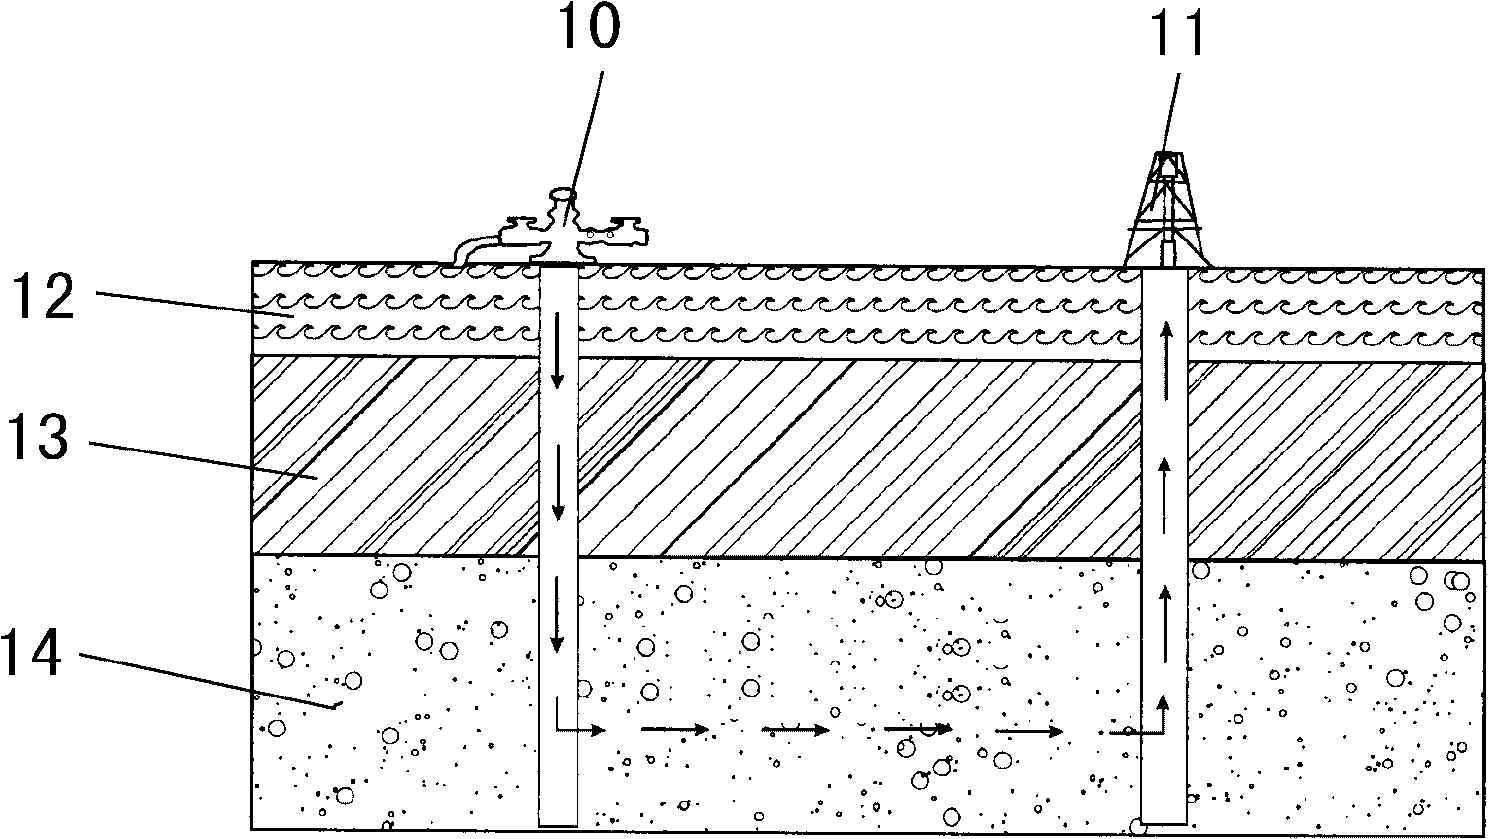 Method for integration of improvement of geothermal recharge rate and geological storage of CO2